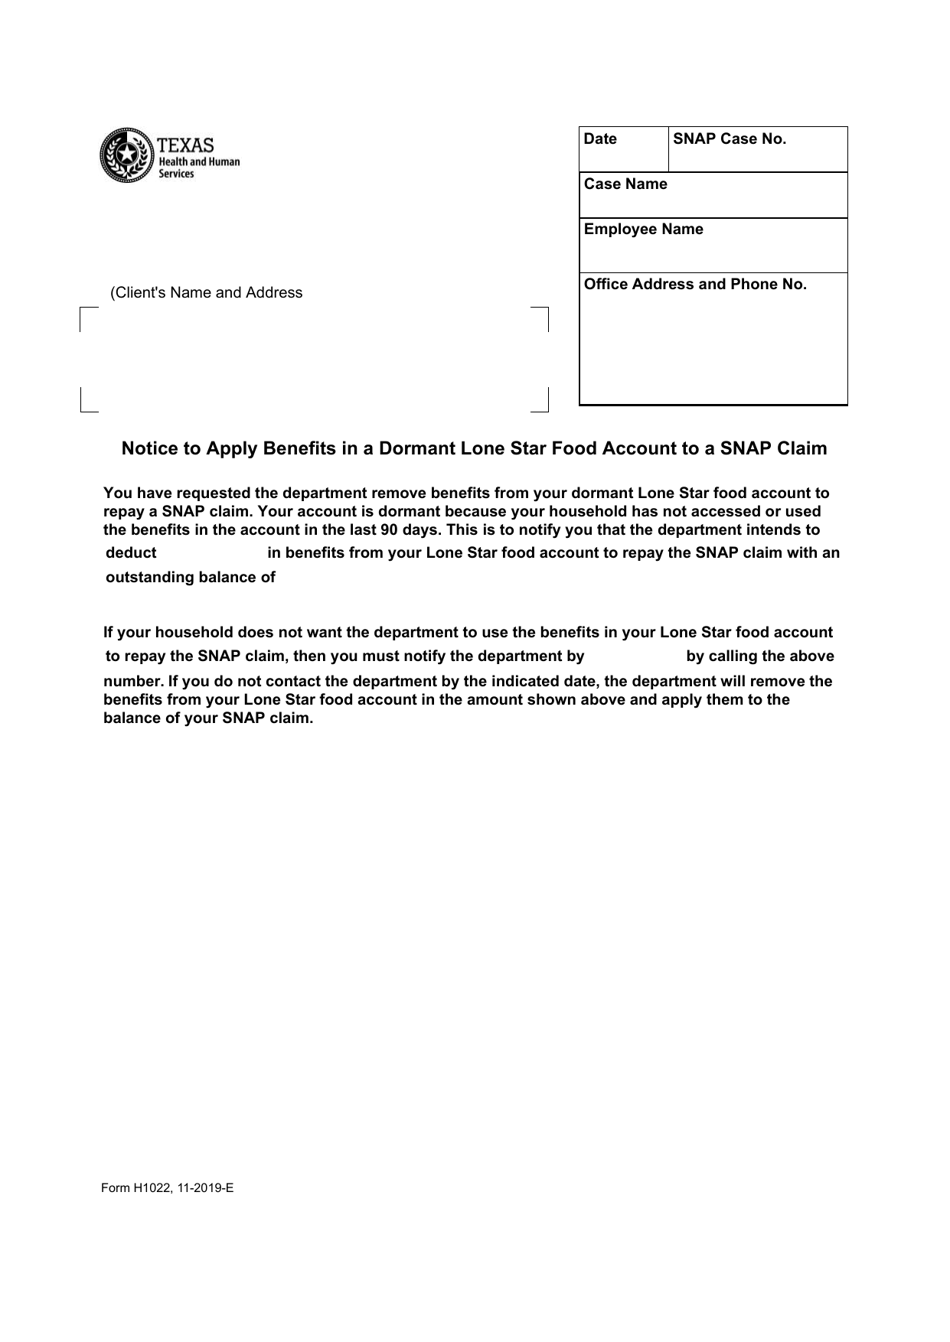 Form H1022 Notice to Apply Benefits in a Dormant Lone Star Food Account to a Snap Claim - Texas, Page 1